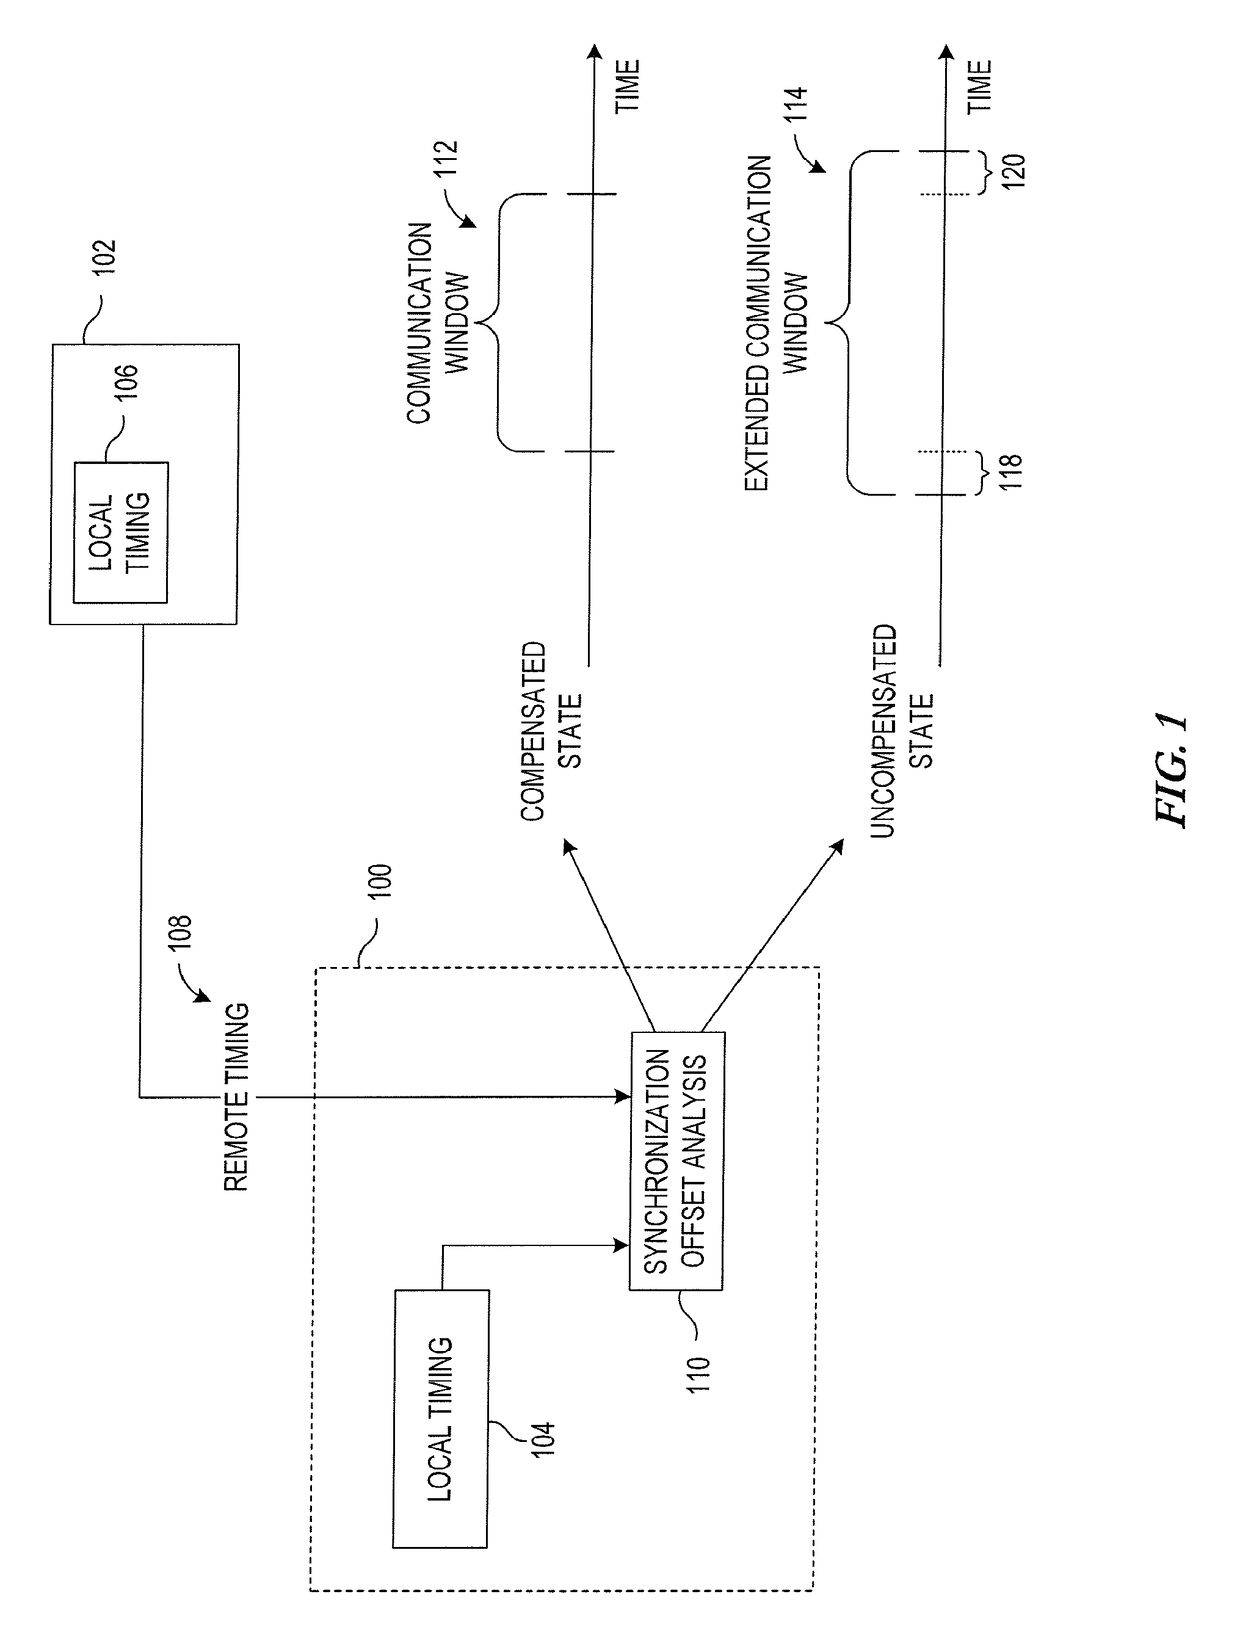 System, apparatus and method for synchronizing communications between devices